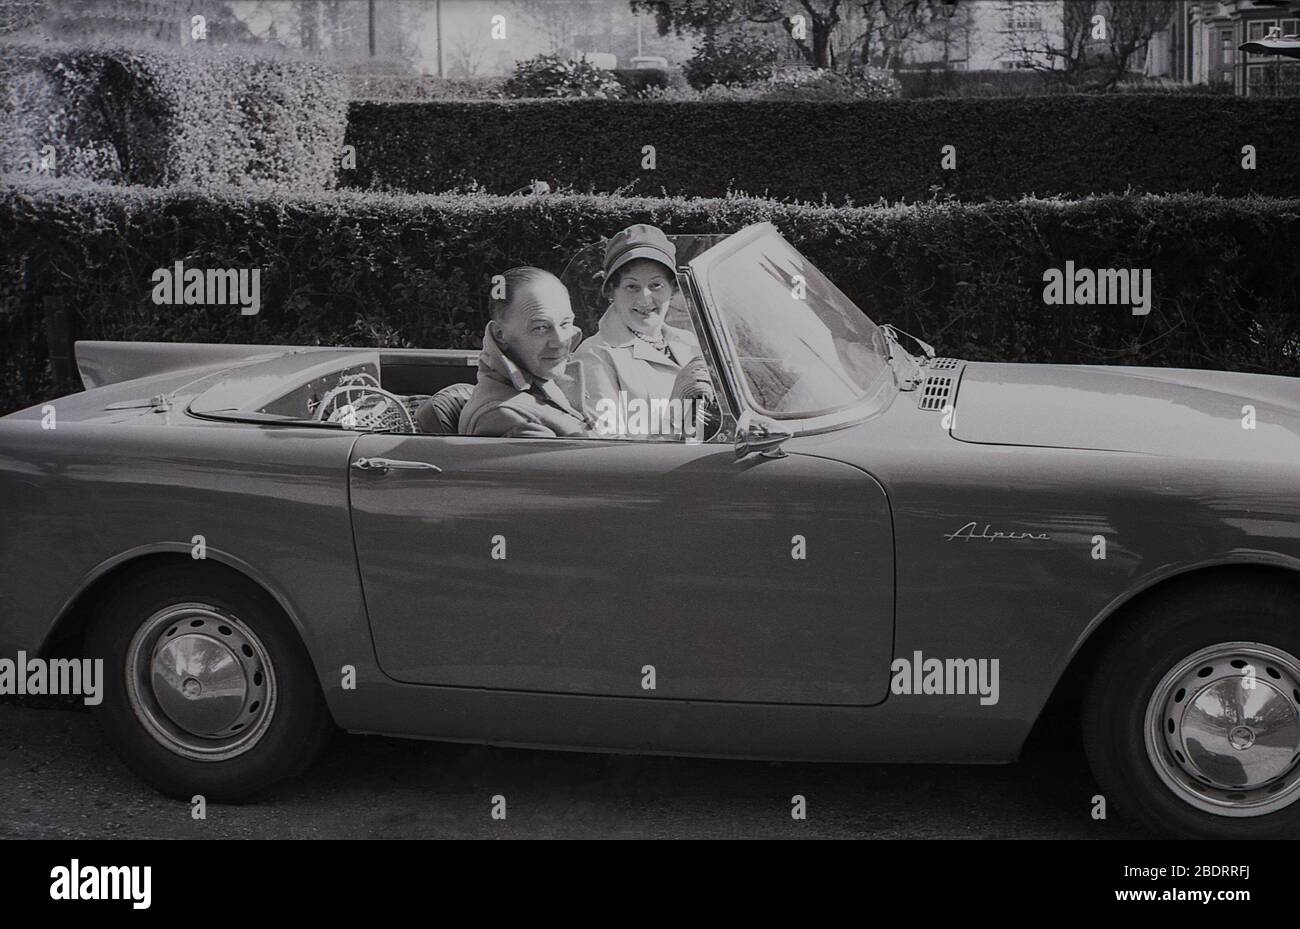 1960s, historical, motoring in this era, a middle-aged couple sitting in their Sunbeam Alpine sports car parked on a driveway at Eastholm Green, Letchworth Garden City, Herts, England, UK. Made by the Rootes Group, production spanned the years 1953-1975, with the car seen from the Series I-IV from 1959 to 1968. Stock Photo